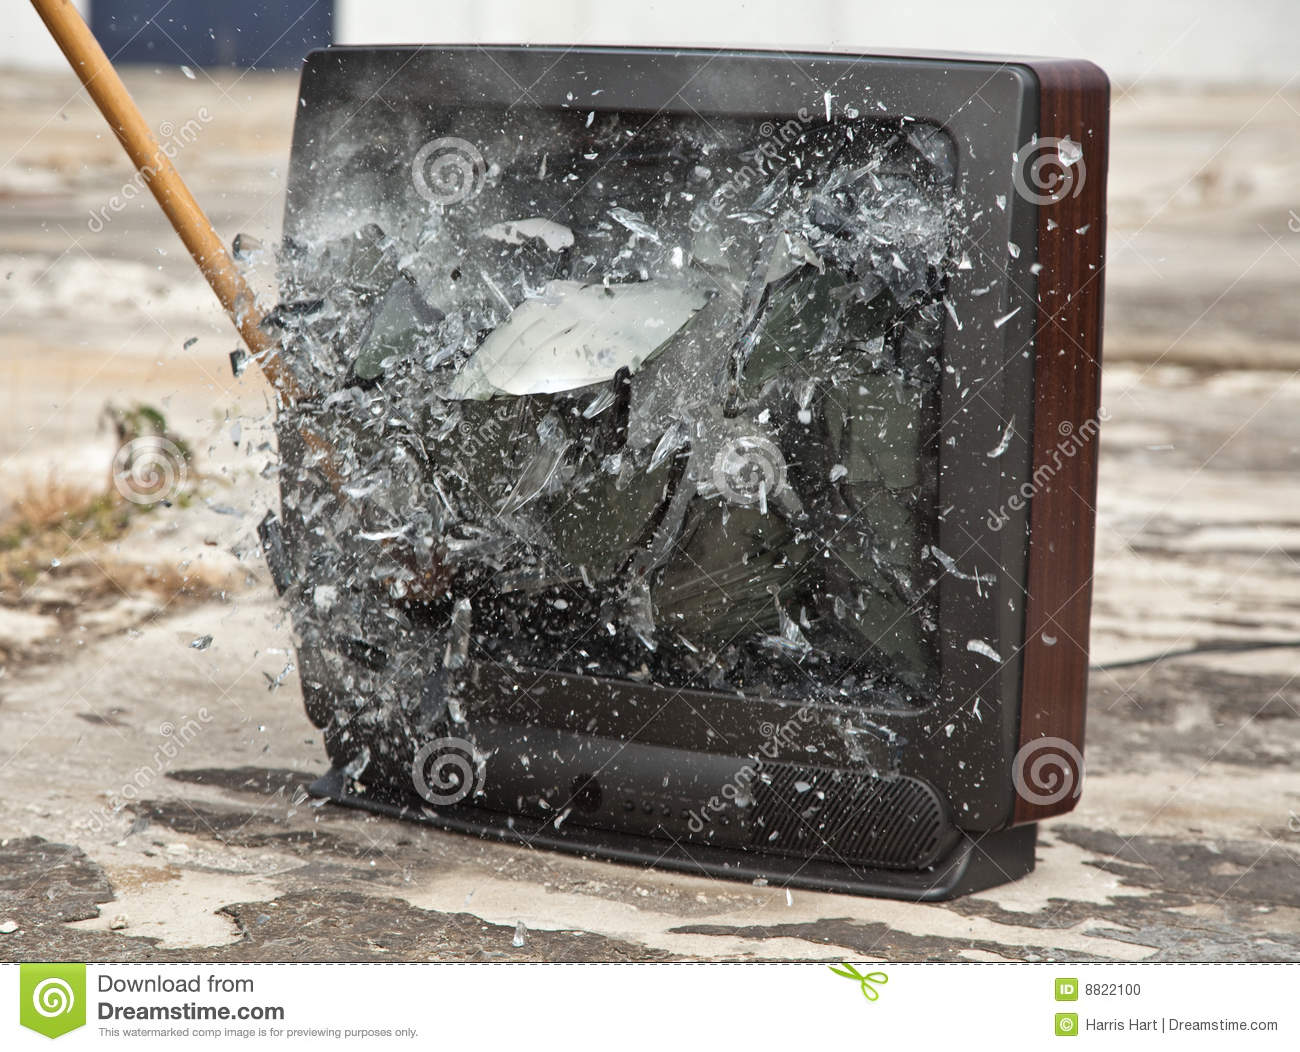 An Old Tube Television Exploding From A Sledge Hammer Blow 